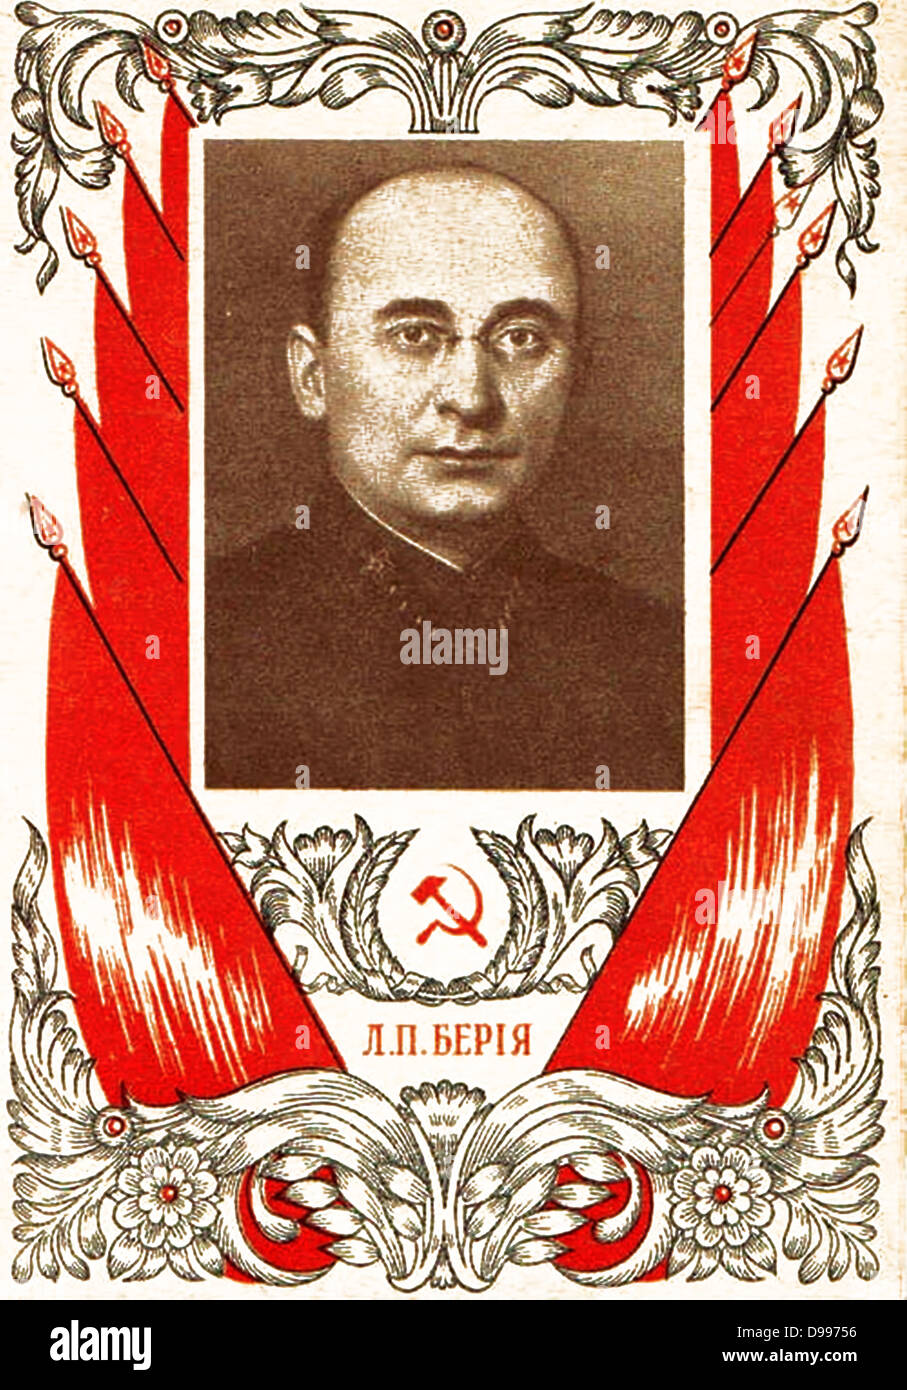 Lavrentiy Pavlovich Beria (1899 – 1953 Georgian Soviet politician, and chief of the Soviet security and secret police apparatus under Stalin. By the end of the Great Purge, he had become deputy head and subsequently head of the NKVD and carried out a purge of the NKVD itself. Stock Photo